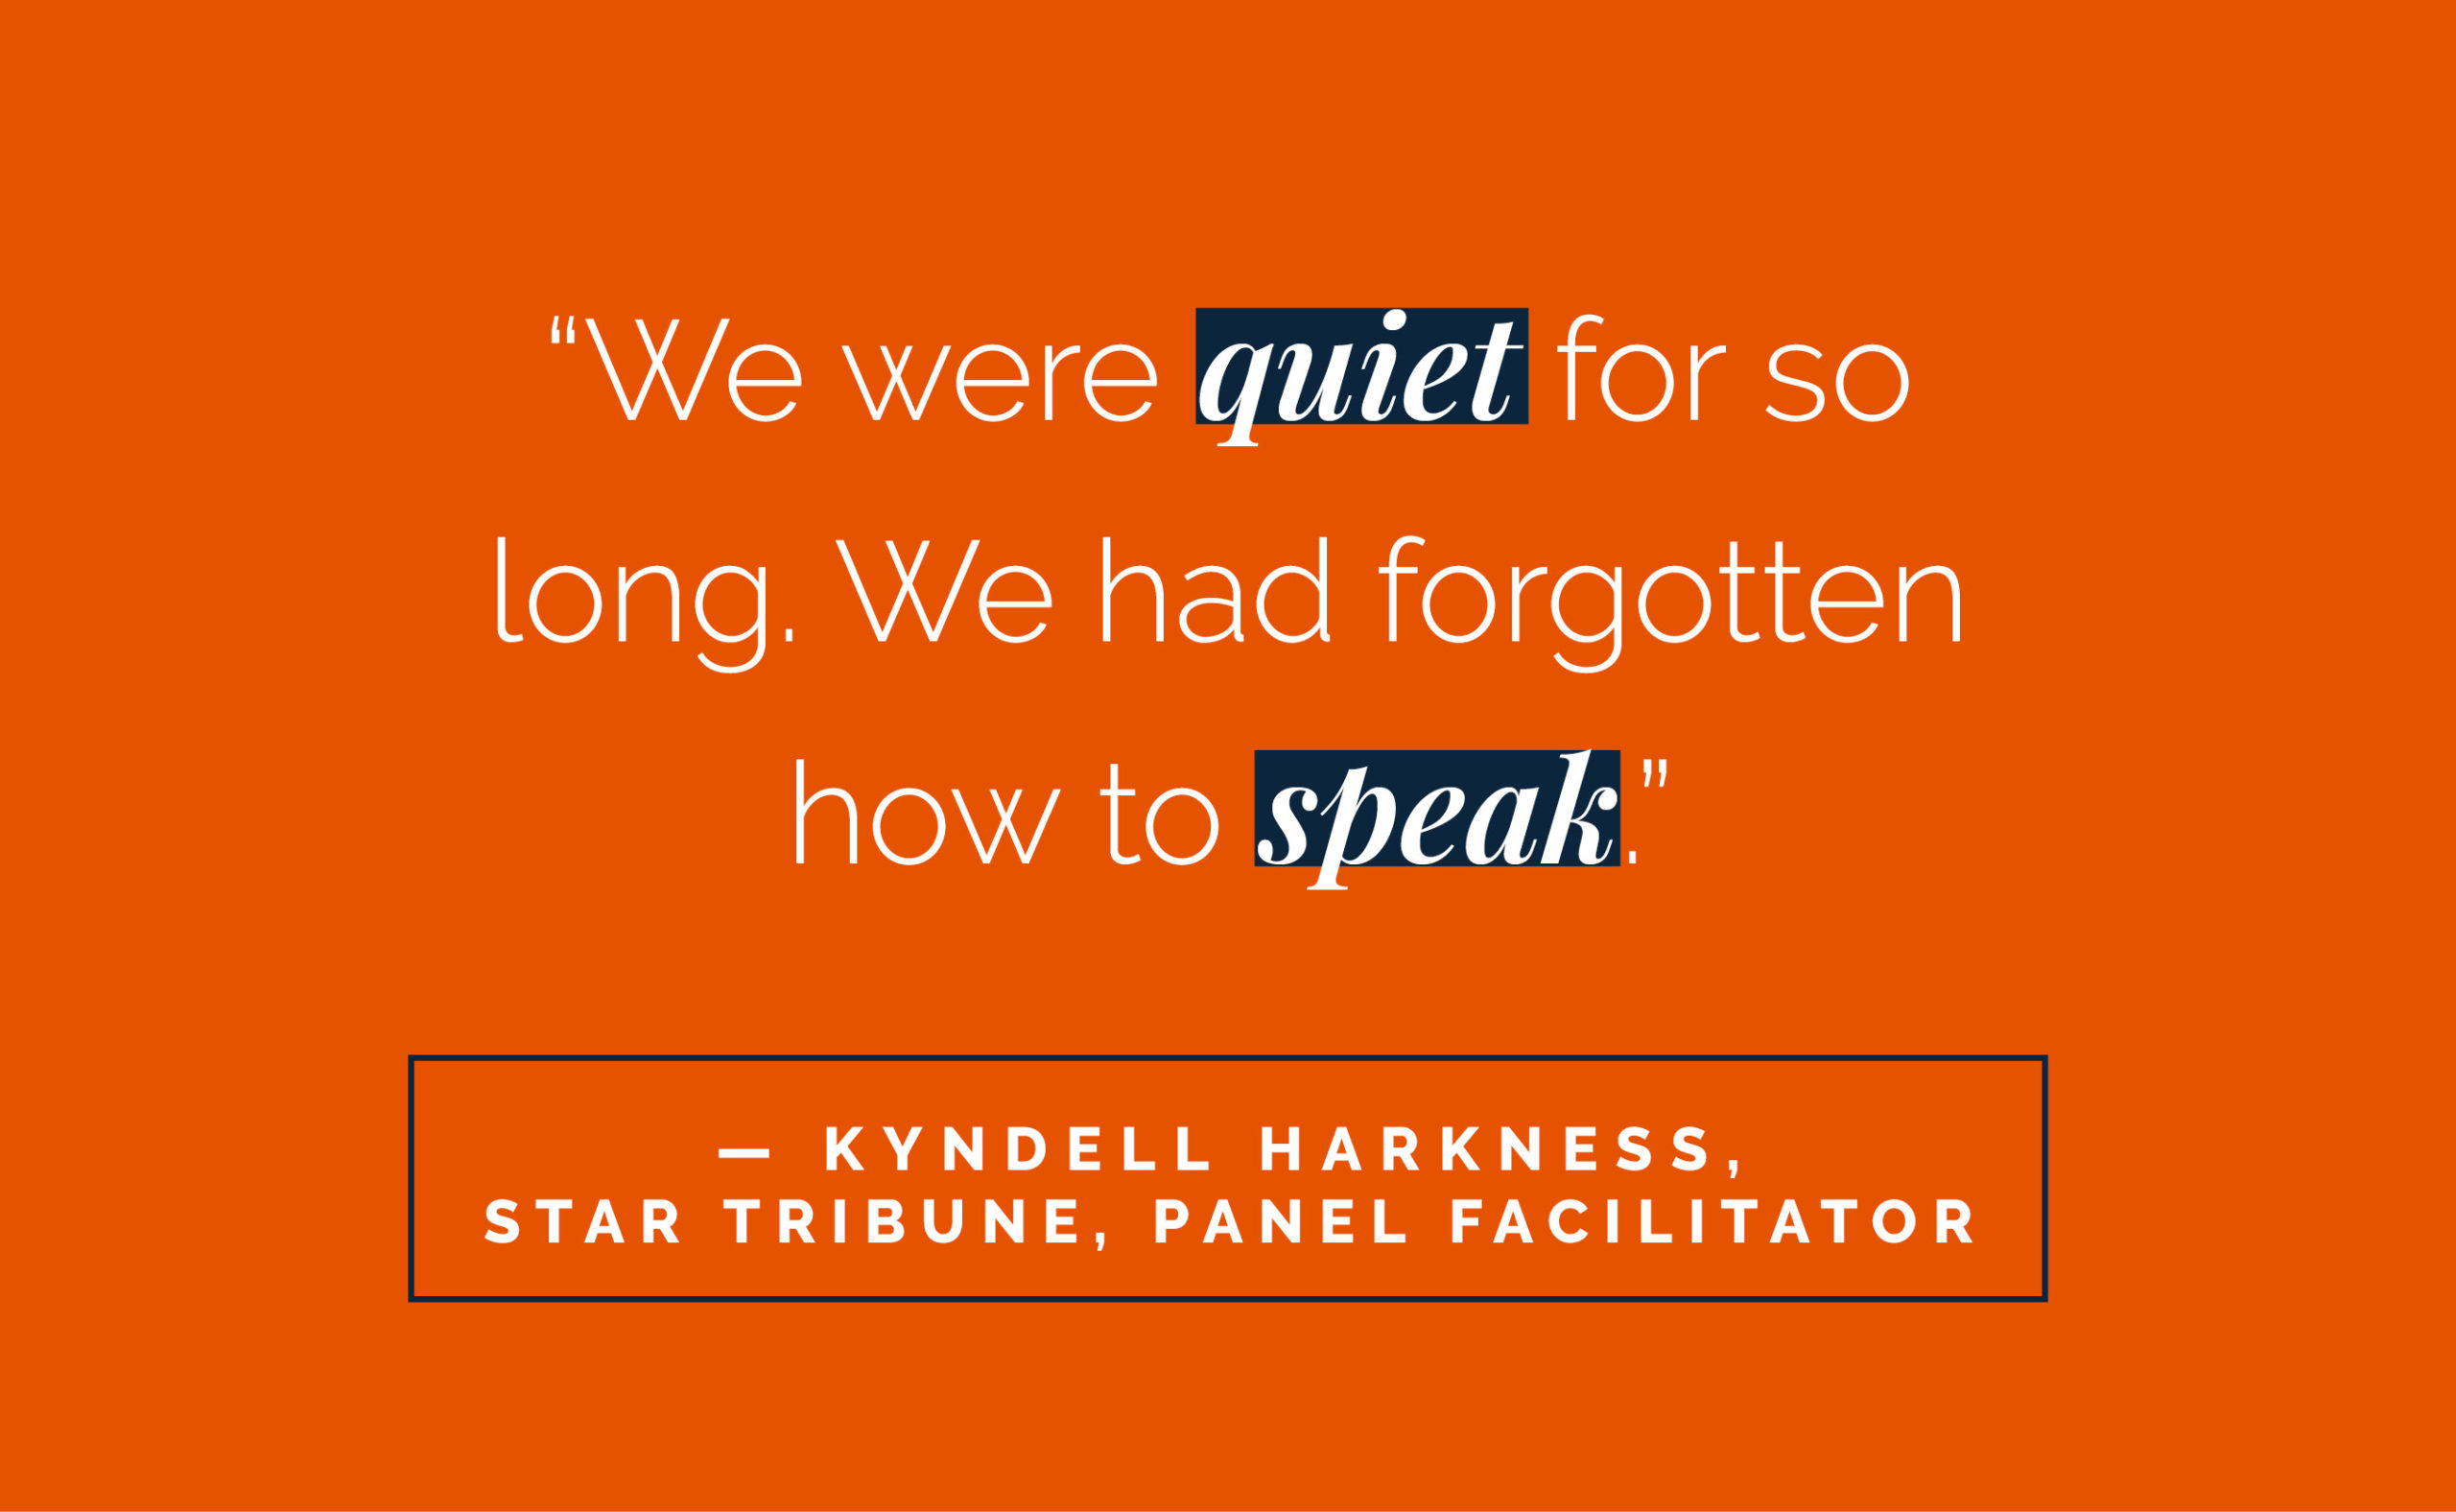 “We were quiet for so long. We had forgotten how to speak.” - Kyndell Harkness, Star Tribune, panel facilitator.